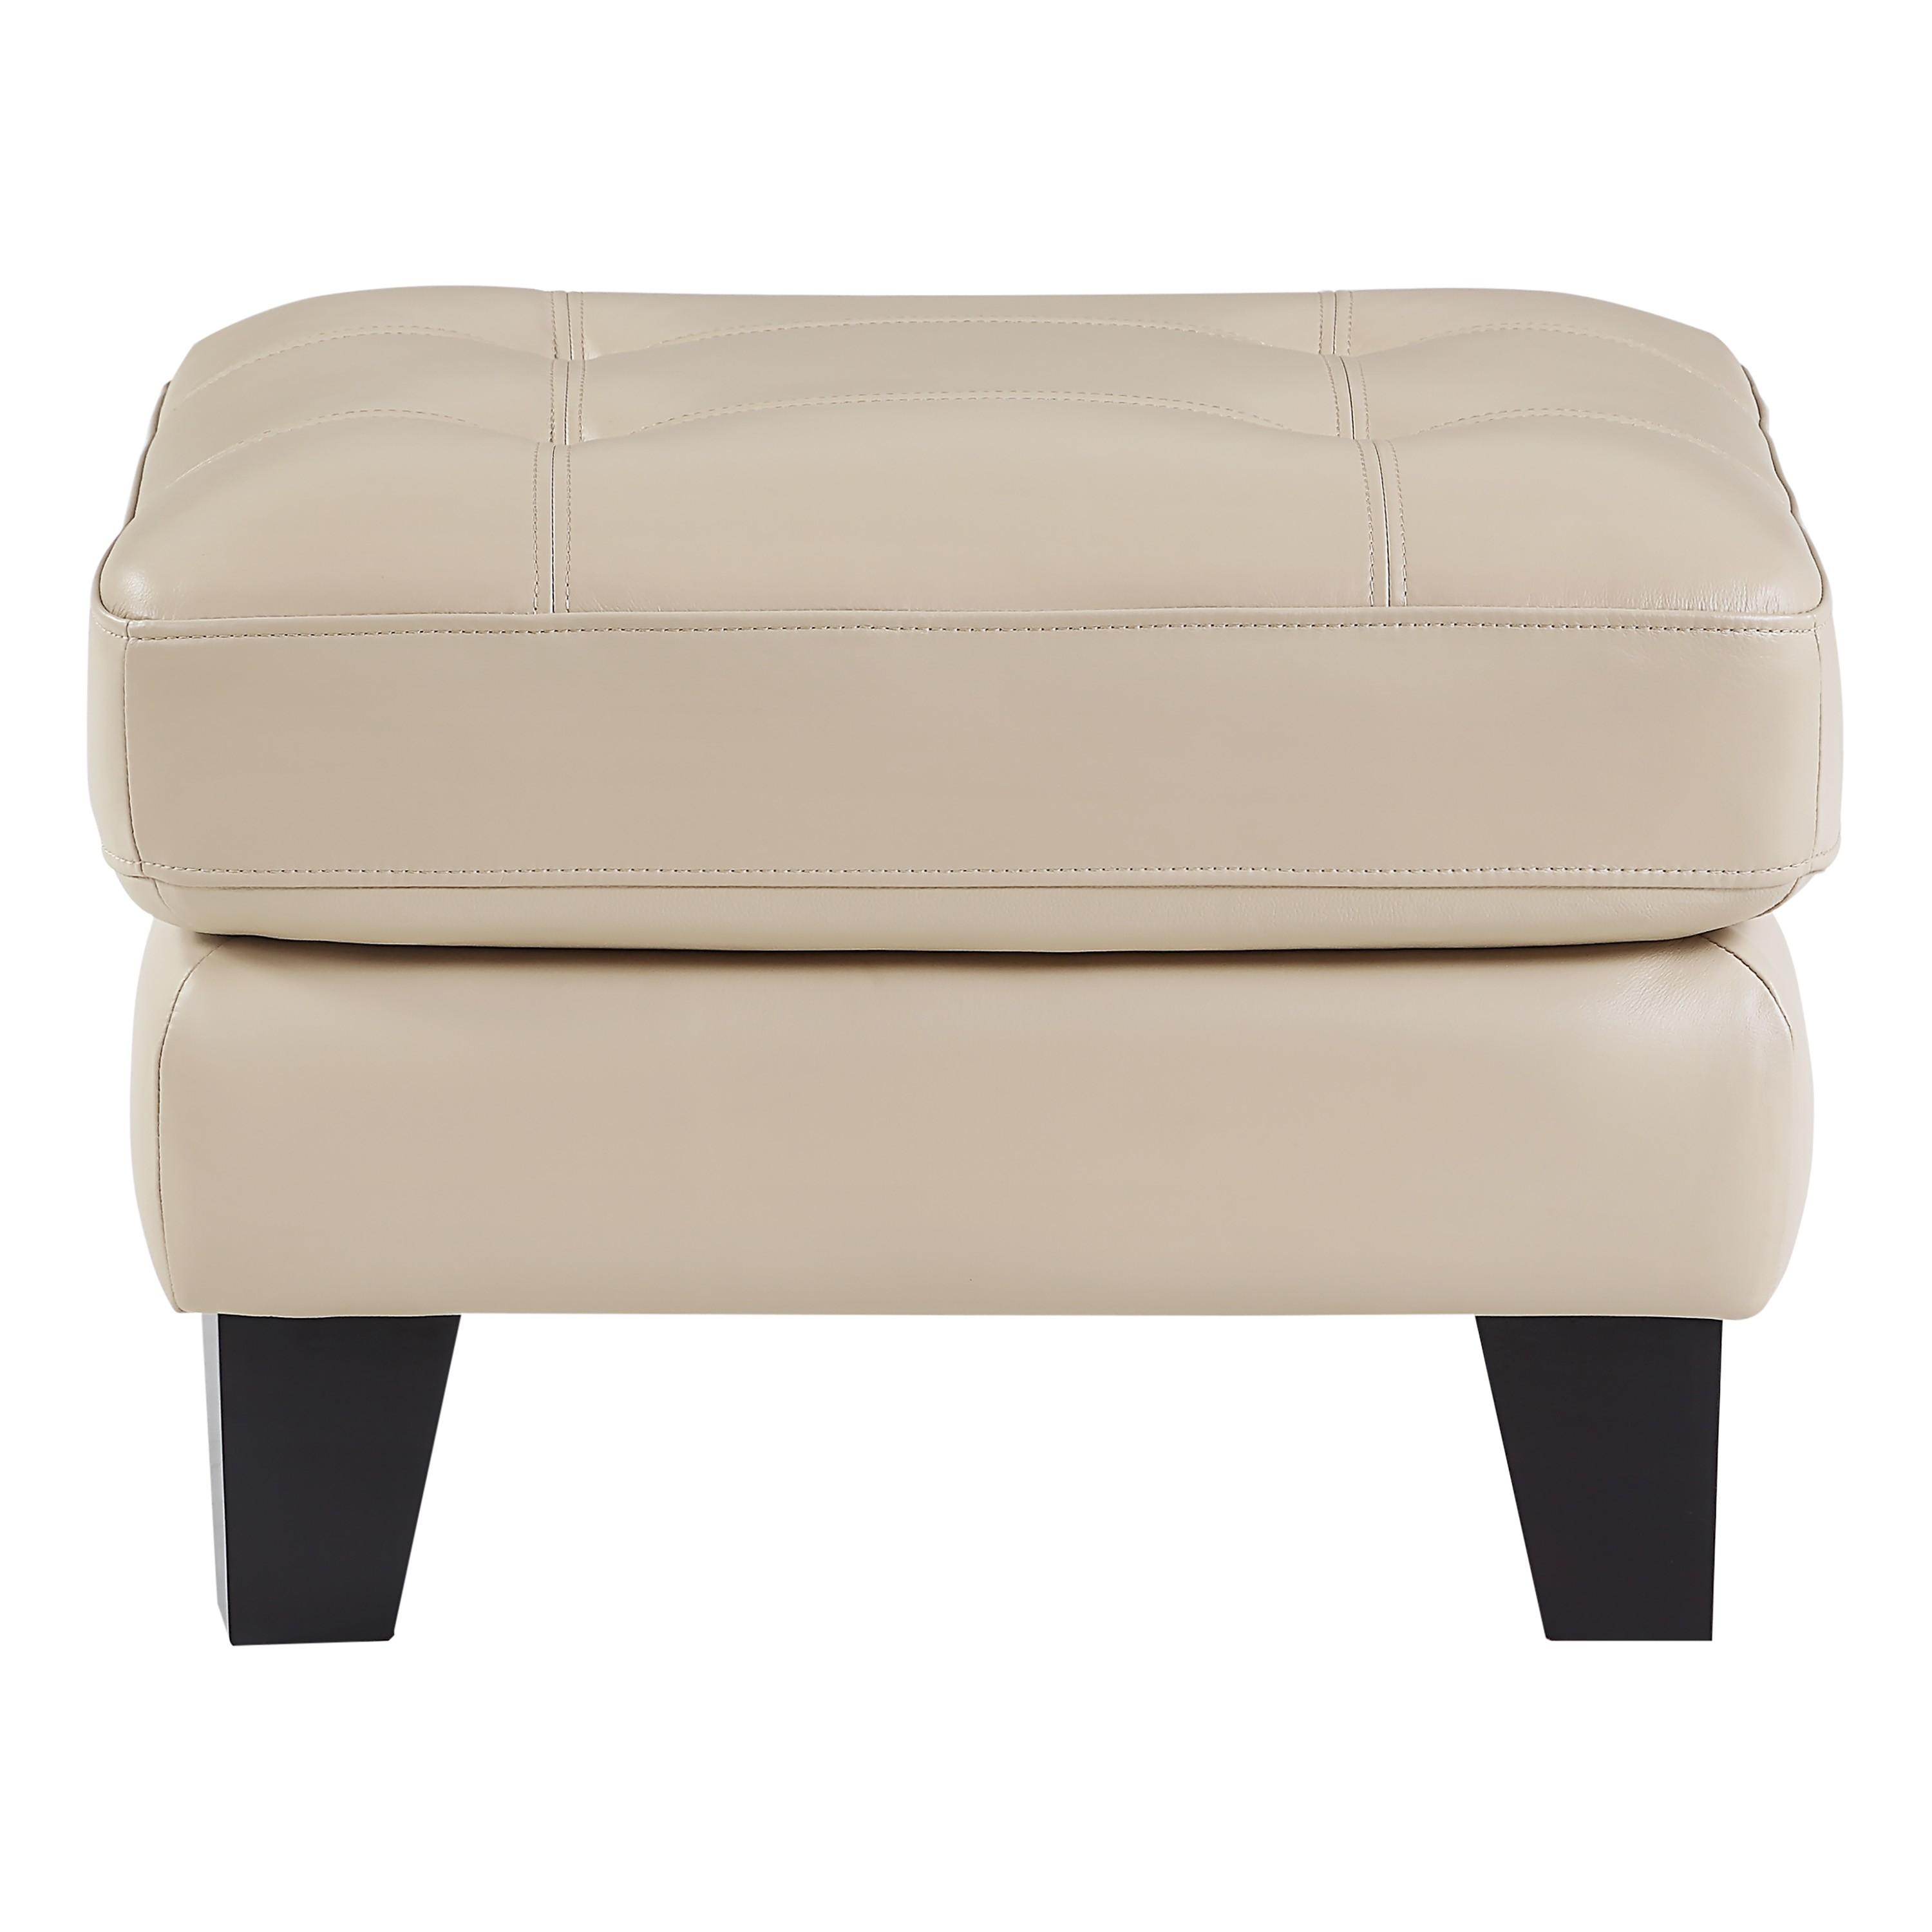 Modern Ottoman 9460BE-4 Spivey 9460BE-4 in Beige Leather